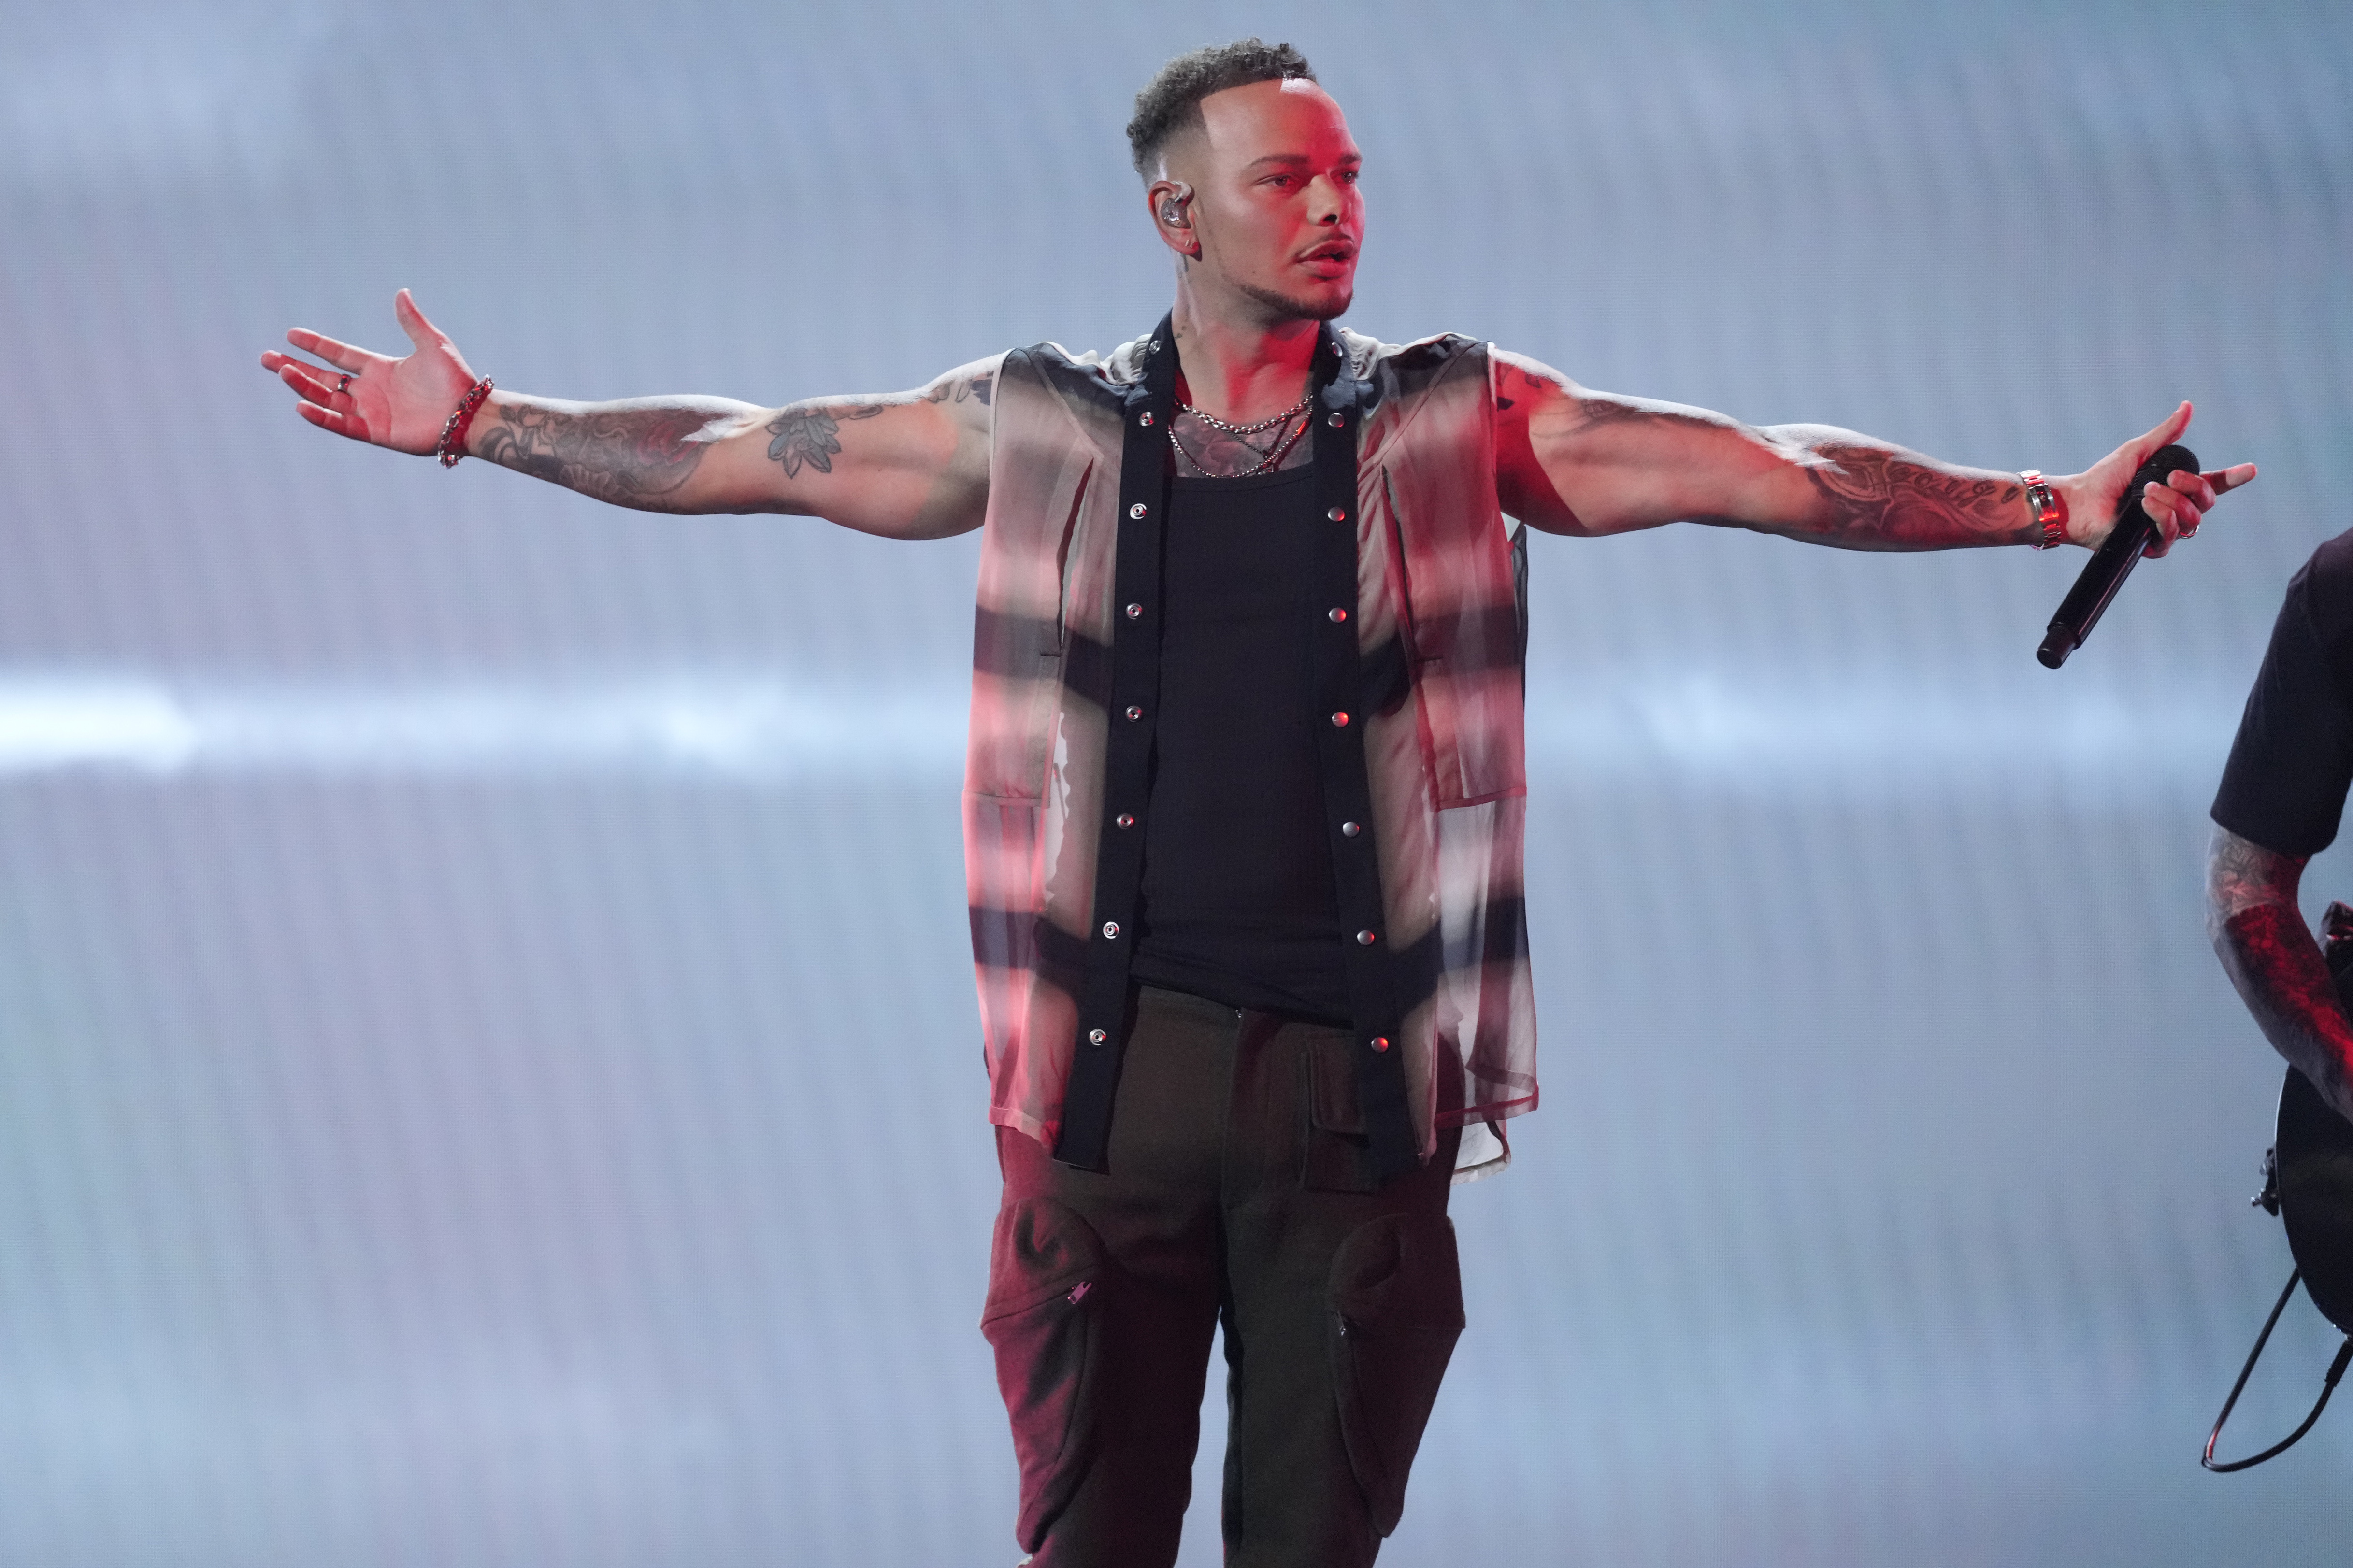 Kane Brown Extends Tour Dates Into 2023